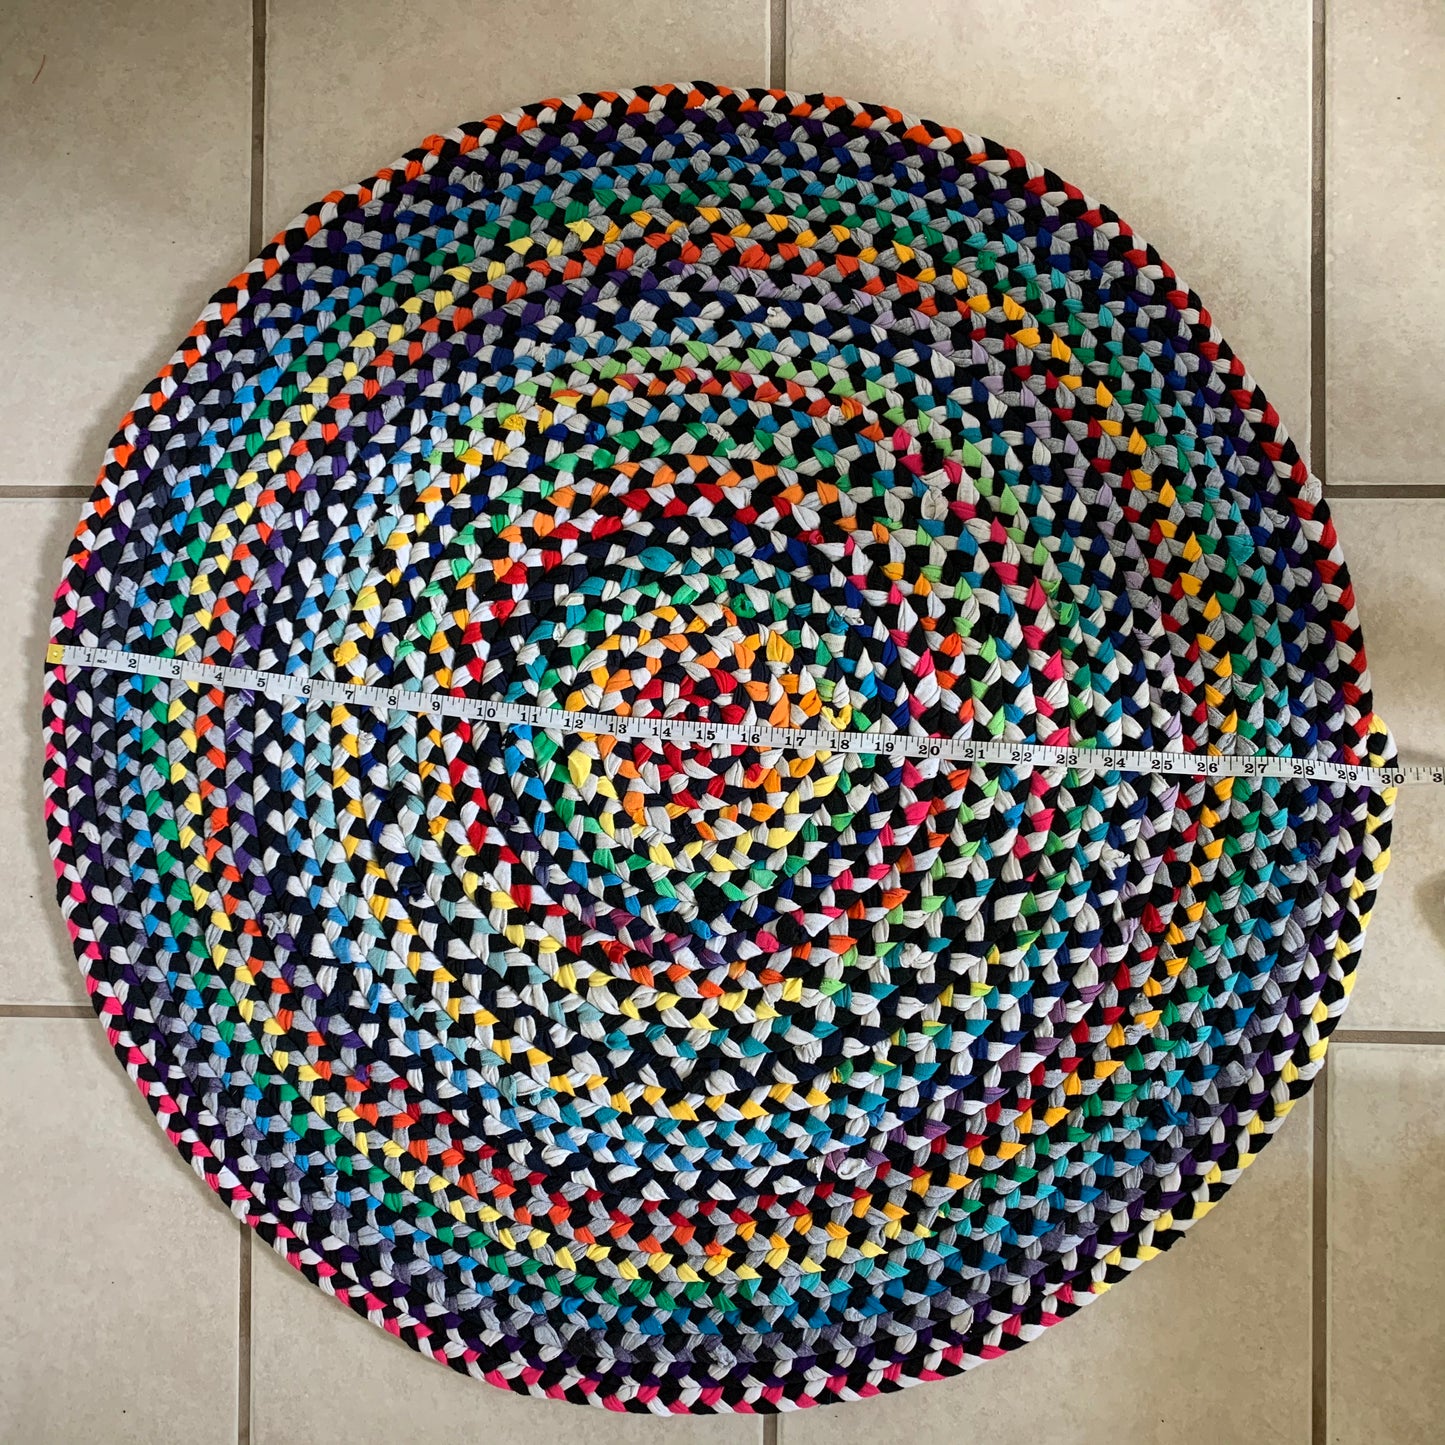 Aerial view, of the top of the rug. There is a measuring tape across the front of the rug, and the tape reads 30 inches as the diameter